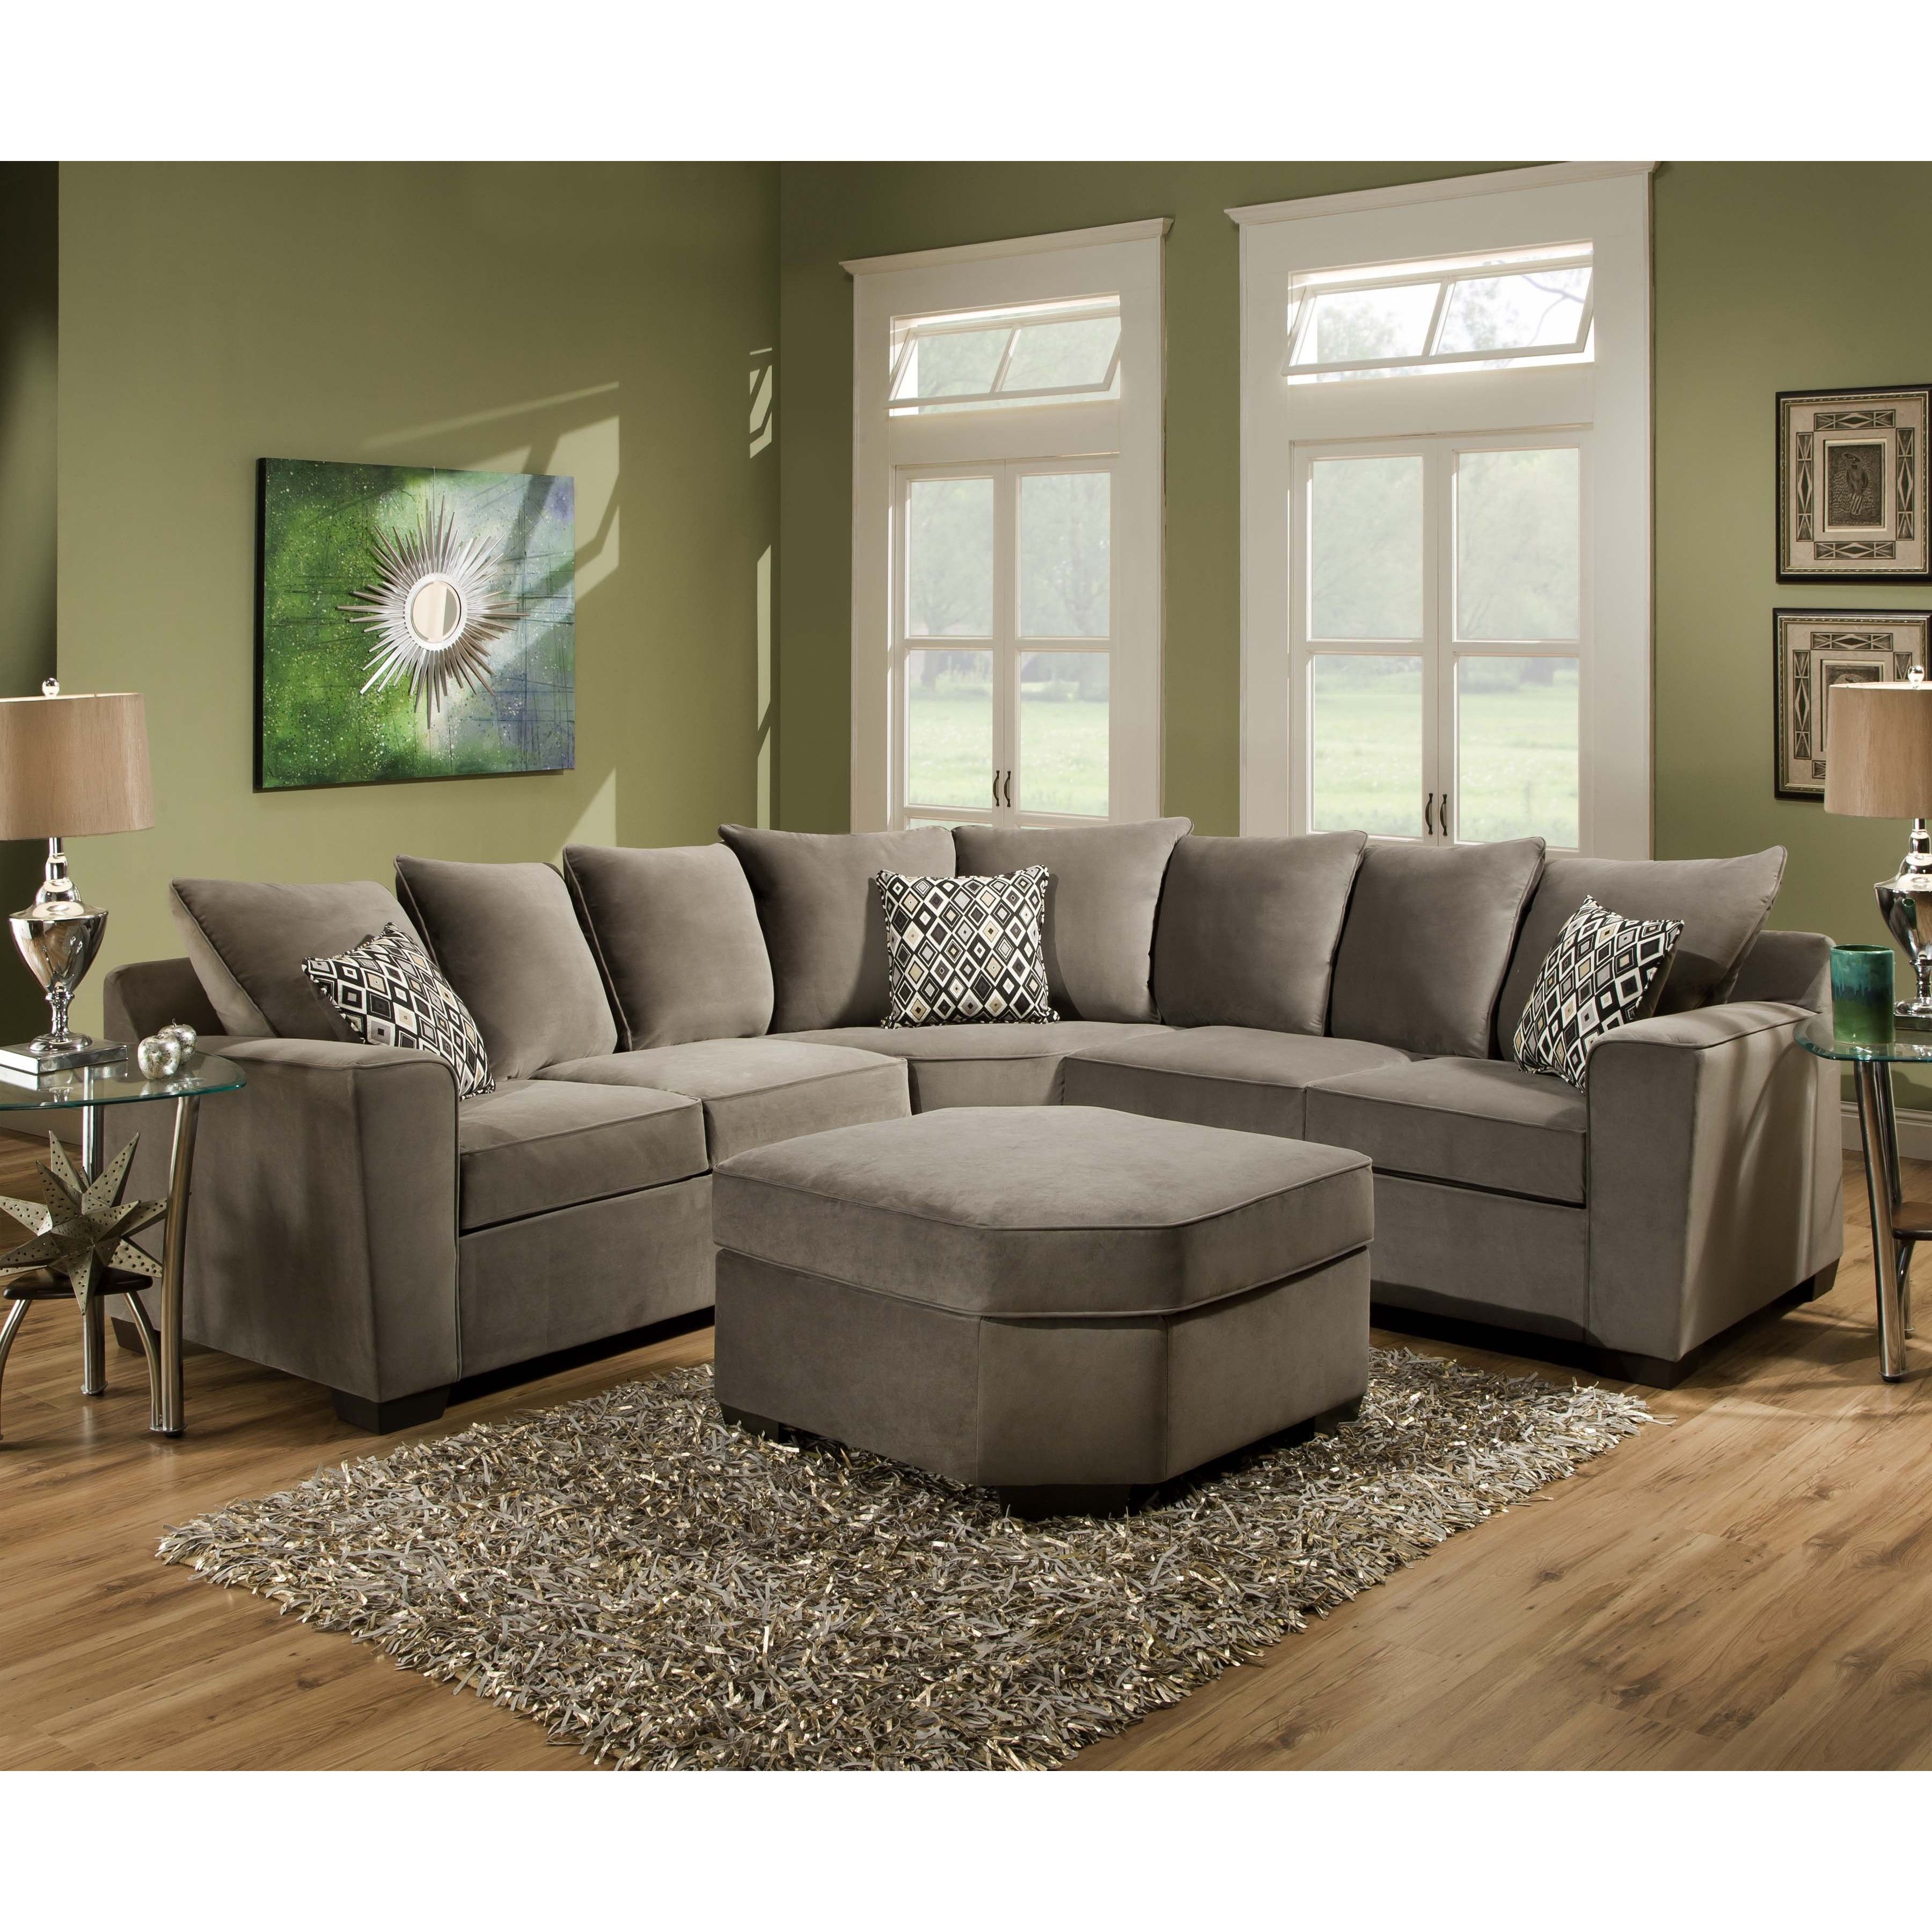 15+ Curved Sectional Sofa With Recliner Sofa Ideas